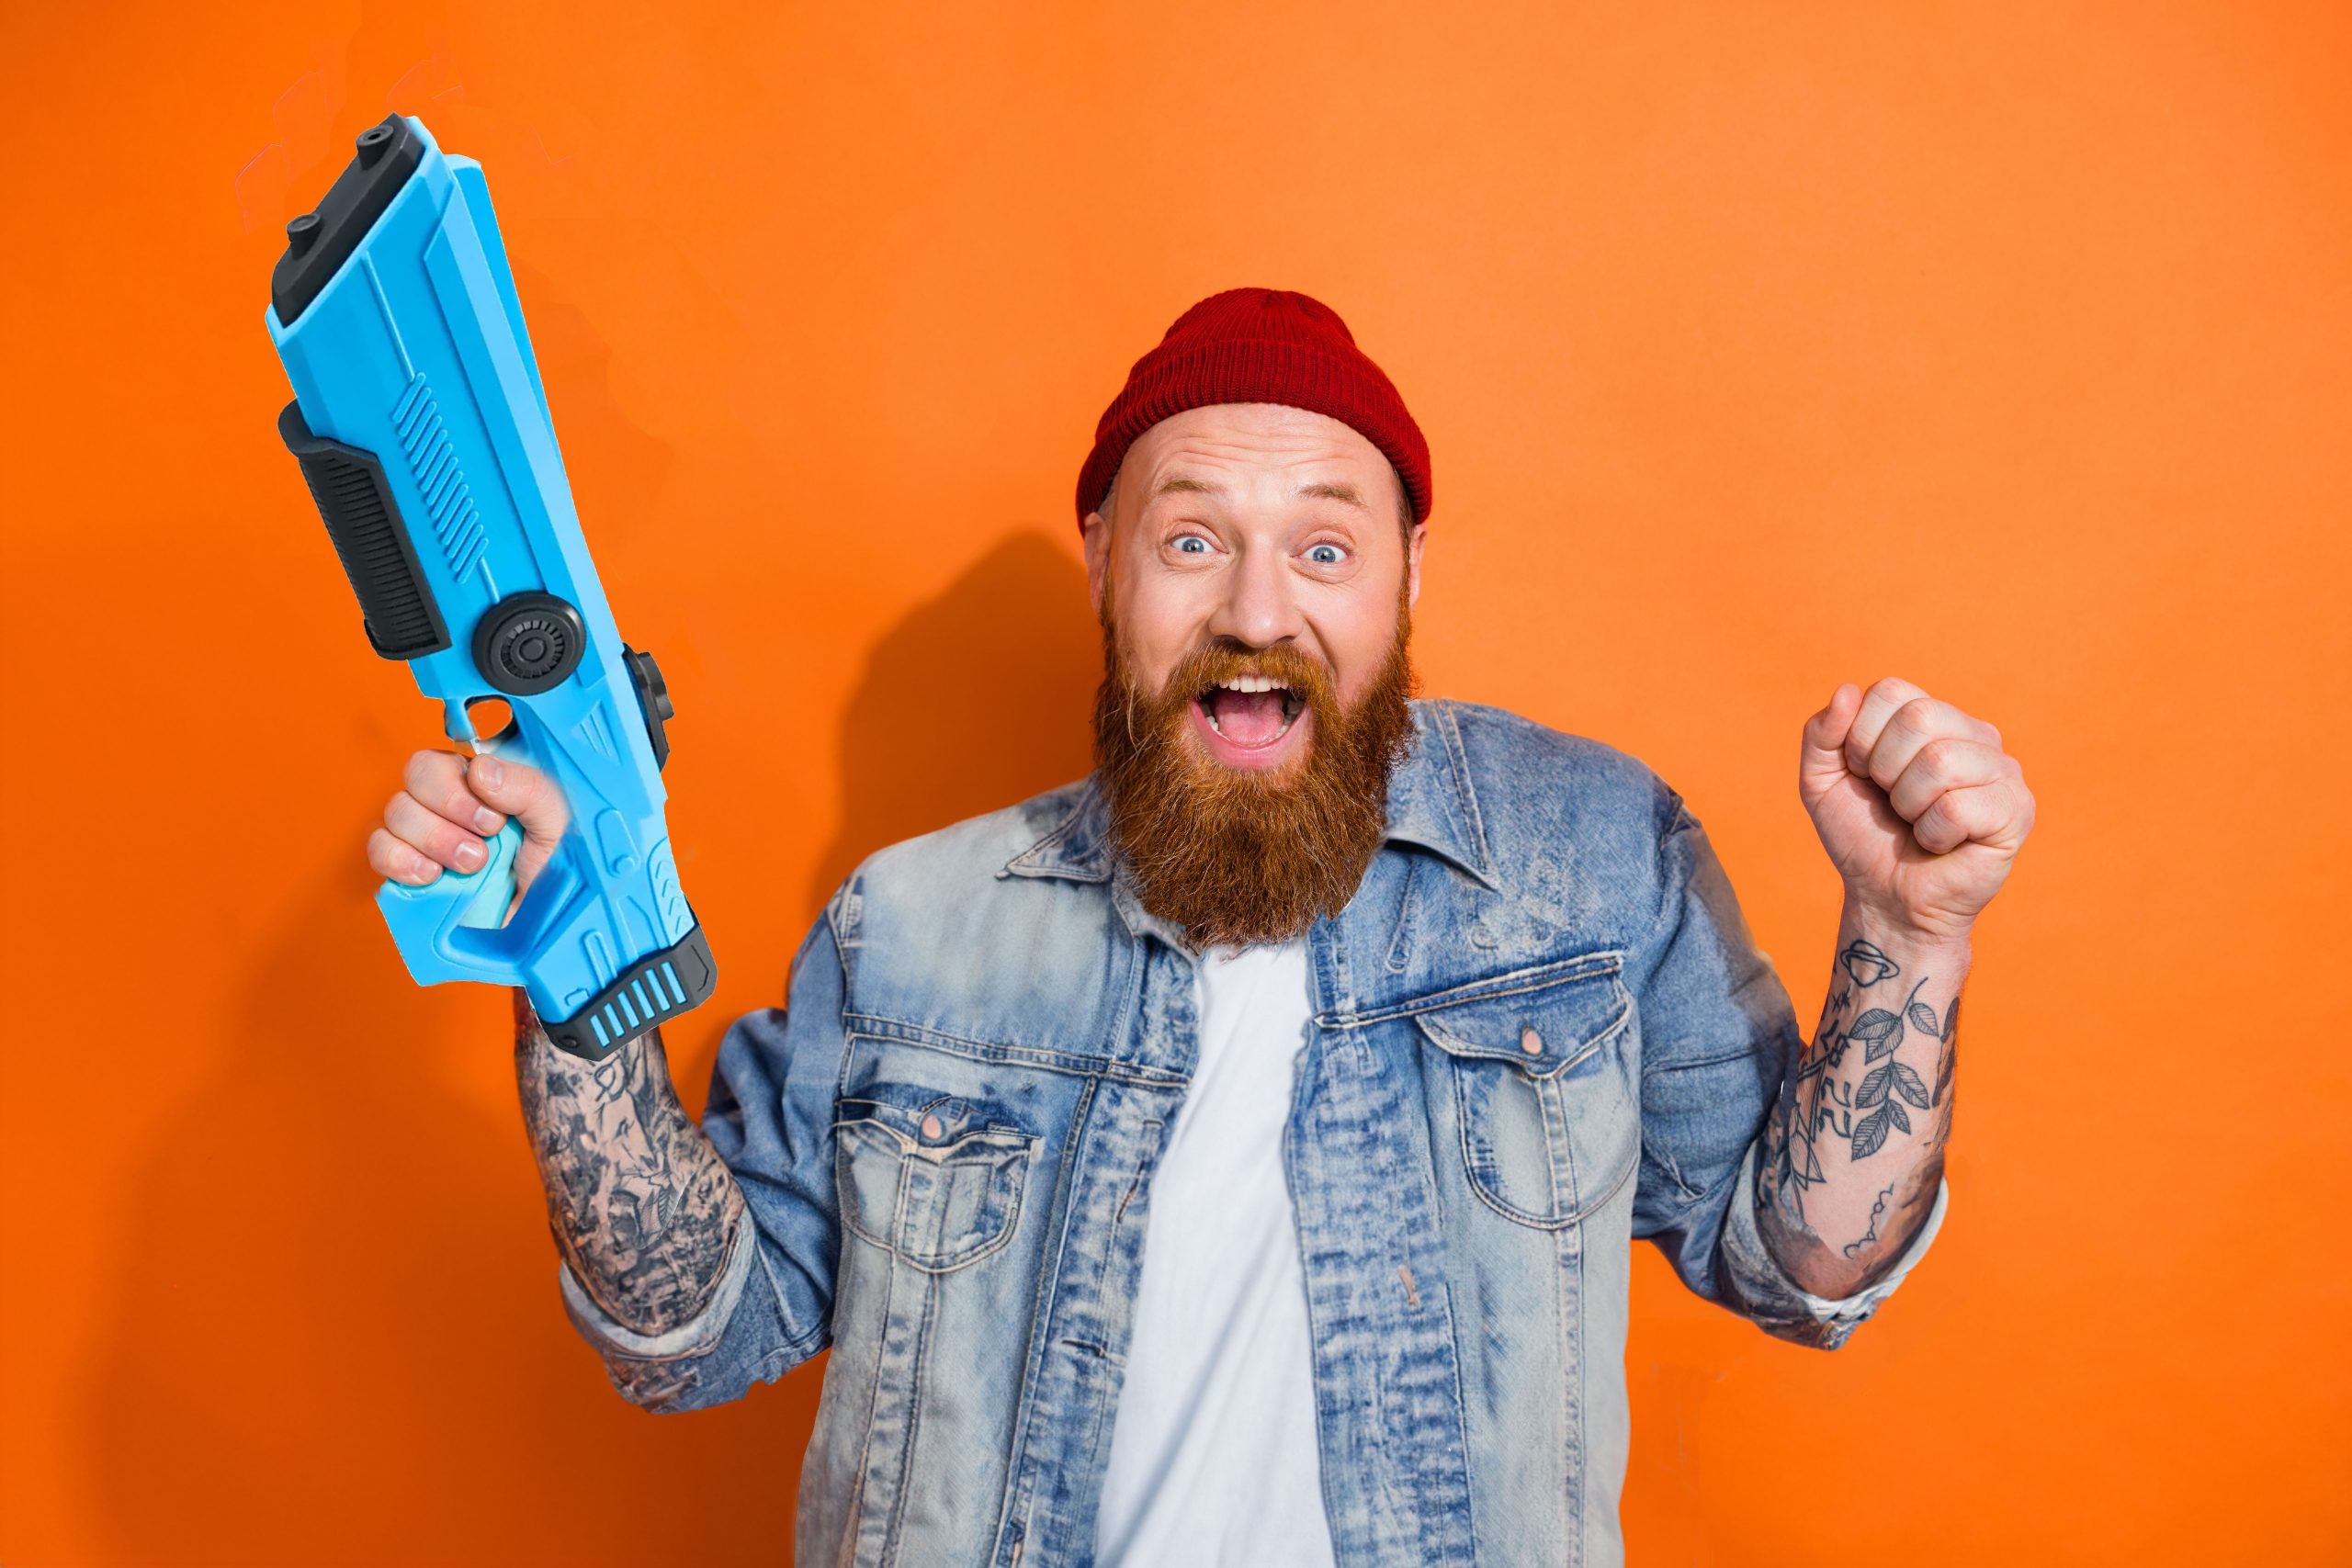 A cheerful man with a red beanie and a beard is holding a toy water gun with a look of mock excitement on an orange background